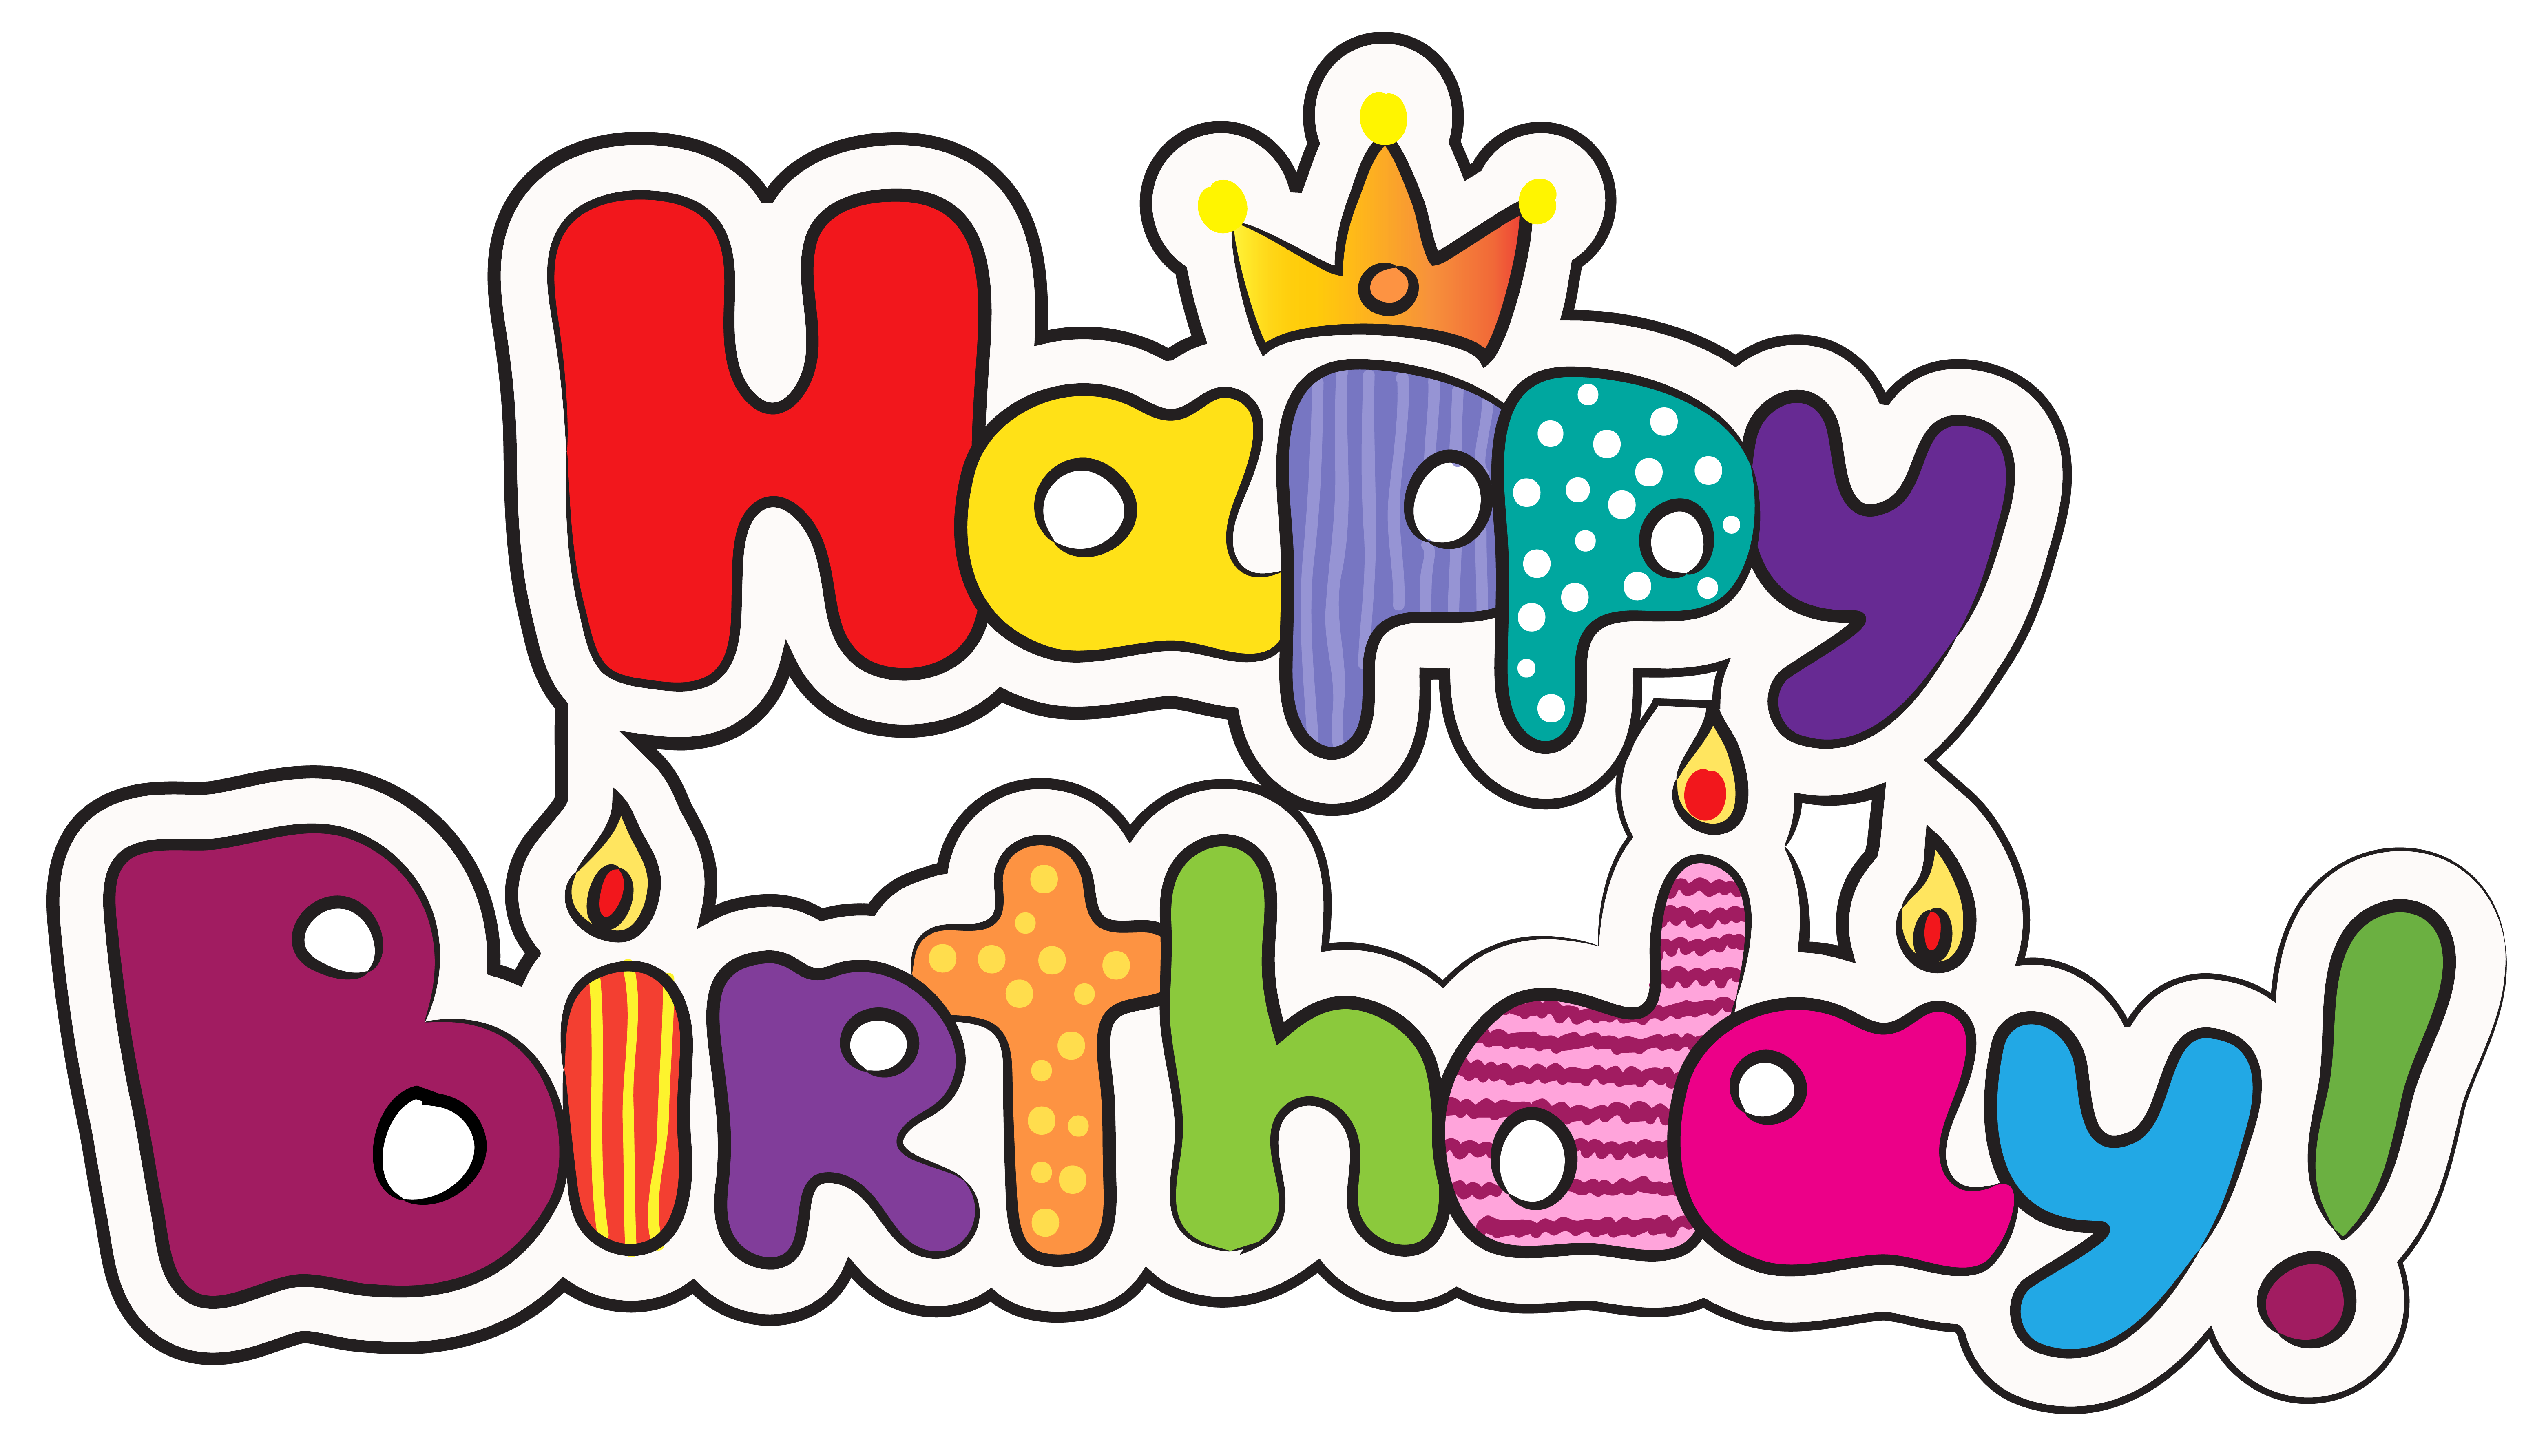 Colorful clipart image gallery. Happy birthday png images